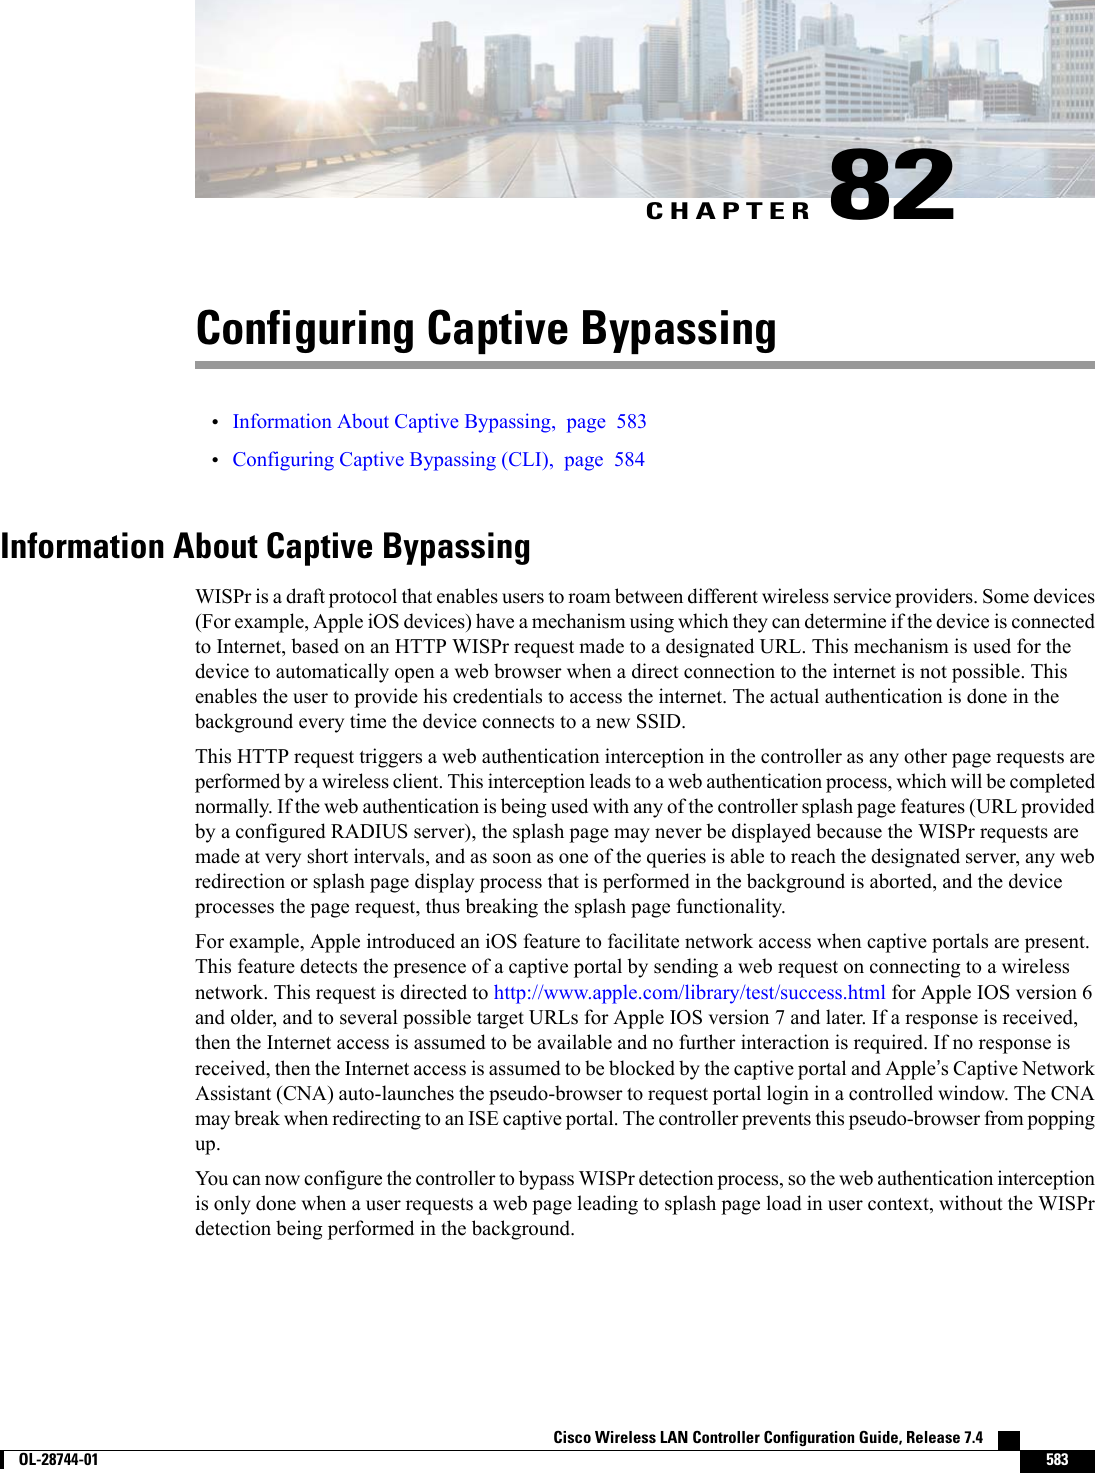 CHAPTER 82Configuring Captive Bypassing•Information About Captive Bypassing, page 583•Configuring Captive Bypassing (CLI), page 584Information About Captive BypassingWISPr is a draft protocol that enables users to roam between different wireless service providers. Some devices(For example, Apple iOS devices) have a mechanism using which they can determine if the device is connectedto Internet, based on an HTTP WISPr request made to a designated URL. This mechanism is used for thedevice to automatically open a web browser when a direct connection to the internet is not possible. Thisenables the user to provide his credentials to access the internet. The actual authentication is done in thebackground every time the device connects to a new SSID.This HTTP request triggers a web authentication interception in the controller as any other page requests areperformed by a wireless client. This interception leads to a web authentication process, which will be completednormally. If the web authentication is being used with any of the controller splash page features (URL providedby a configured RADIUS server), the splash page may never be displayed because the WISPr requests aremade at very short intervals, and as soon as one of the queries is able to reach the designated server, any webredirection or splash page display process that is performed in the background is aborted, and the deviceprocesses the page request, thus breaking the splash page functionality.For example, Apple introduced an iOS feature to facilitate network access when captive portals are present.This feature detects the presence of a captive portal by sending a web request on connecting to a wirelessnetwork. This request is directed to http://www.apple.com/library/test/success.html for Apple IOS version 6and older, and to several possible target URLs for Apple IOS version 7 and later. If a response is received,then the Internet access is assumed to be available and no further interaction is required. If no response isreceived, then the Internet access is assumed to be blocked by the captive portal and Apple’s Captive NetworkAssistant (CNA) auto-launches the pseudo-browser to request portal login in a controlled window. The CNAmay break when redirecting to an ISE captive portal. The controller prevents this pseudo-browser from poppingup.You can now configure the controller to bypass WISPr detection process, so the web authentication interceptionis only done when a user requests a web page leading to splash page load in user context, without the WISPrdetection being performed in the background.Cisco Wireless LAN Controller Configuration Guide, Release 7.4        OL-28744-01 583